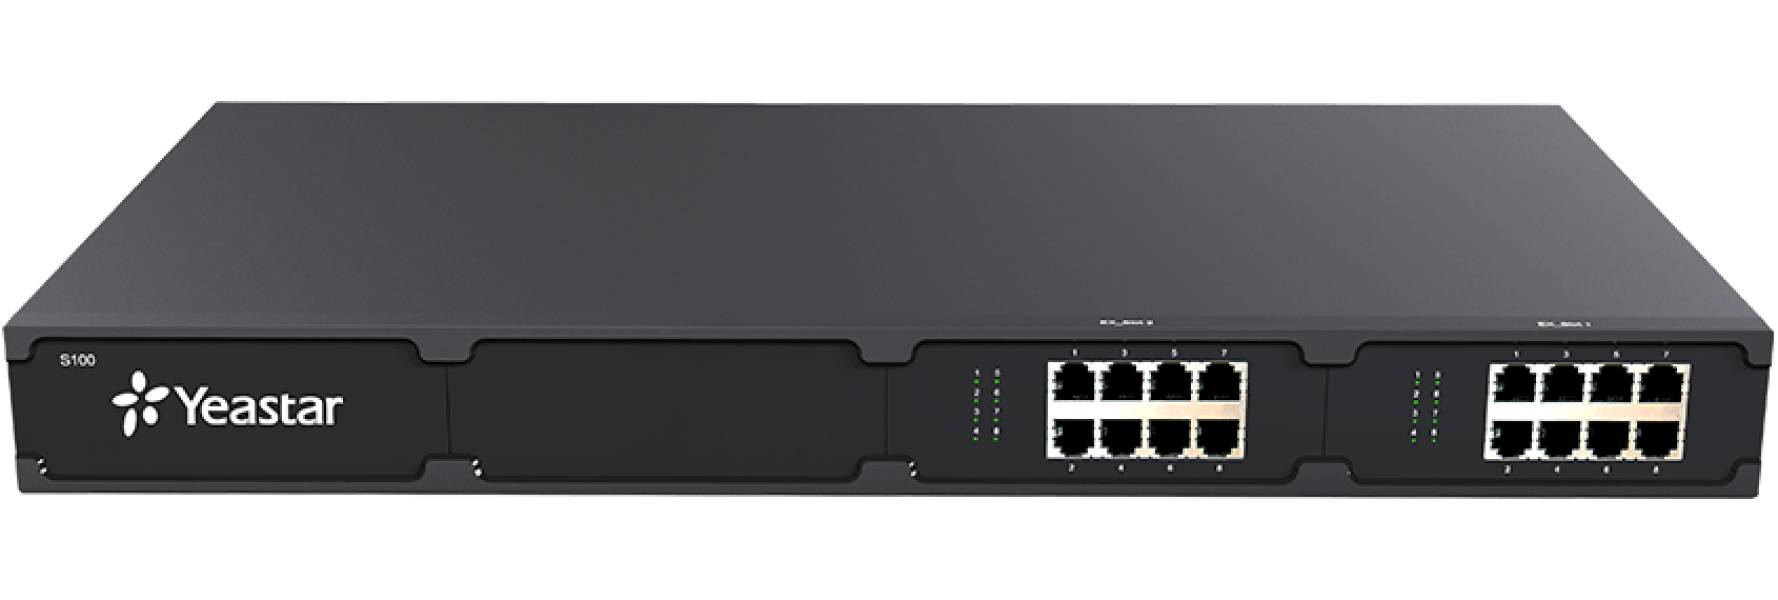 S100 - IP PBX for 100 (200) users